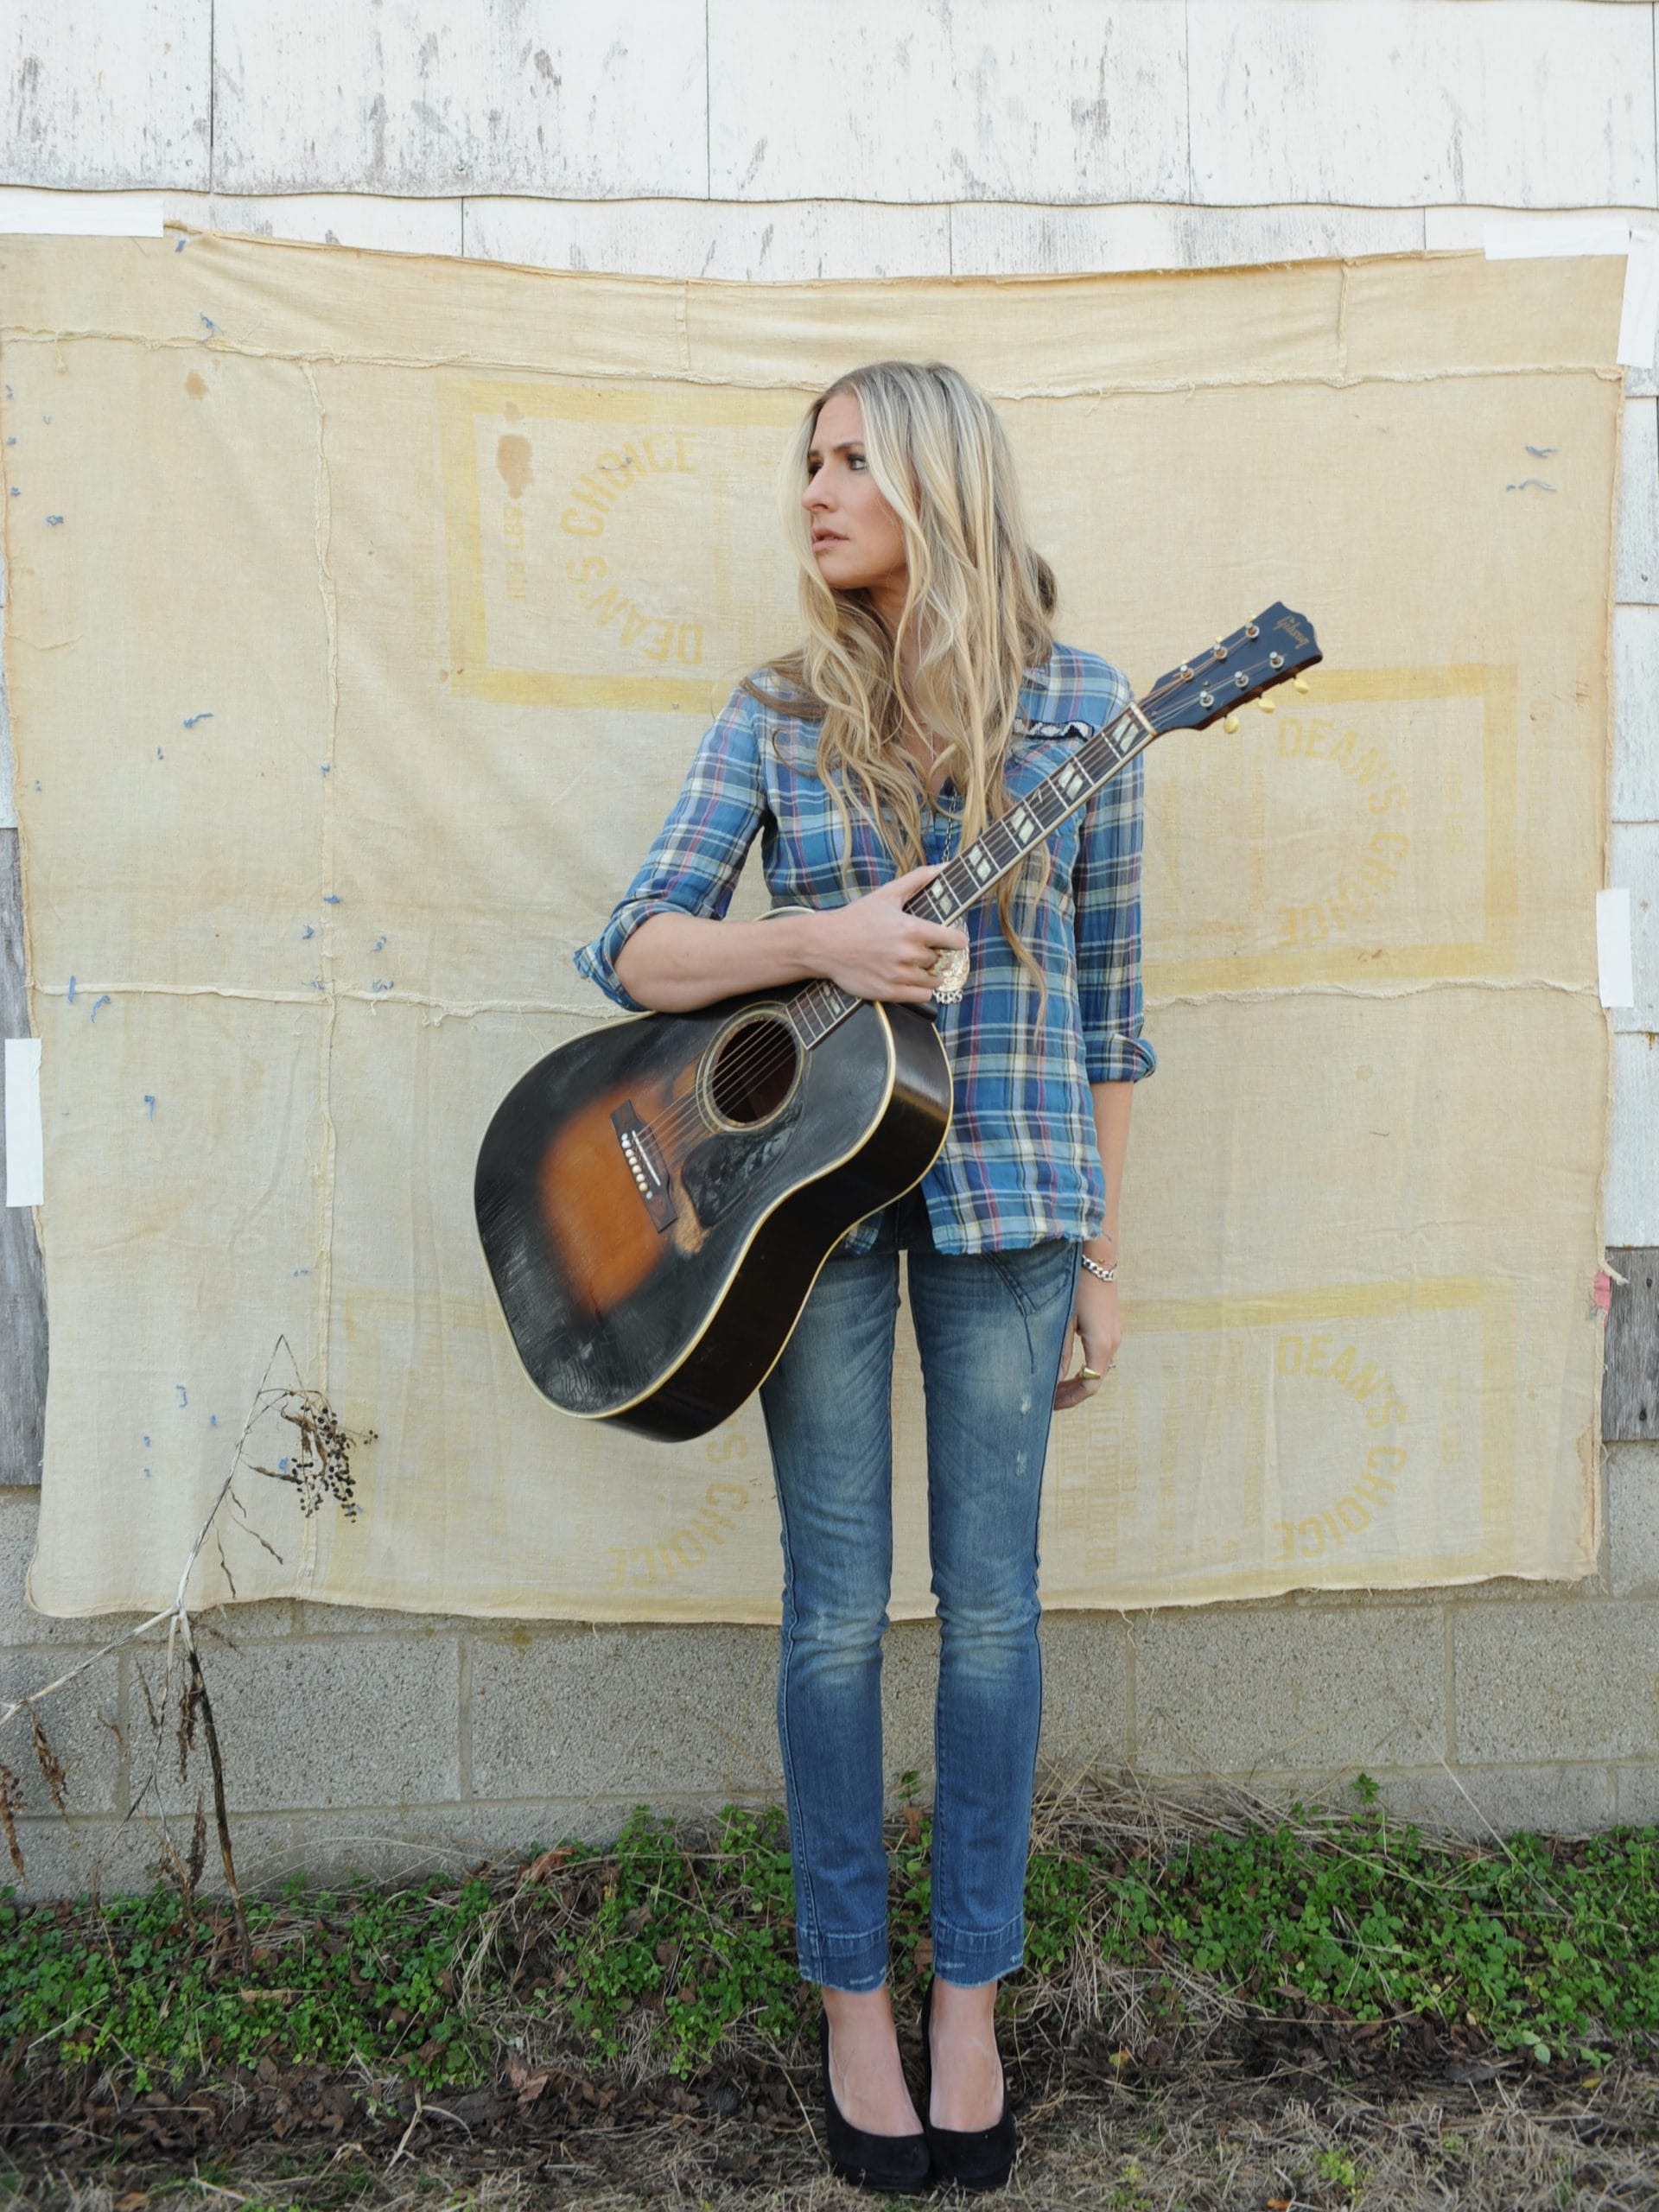 The Trust for Holly Williams' Land: country music scion speaks up for nature